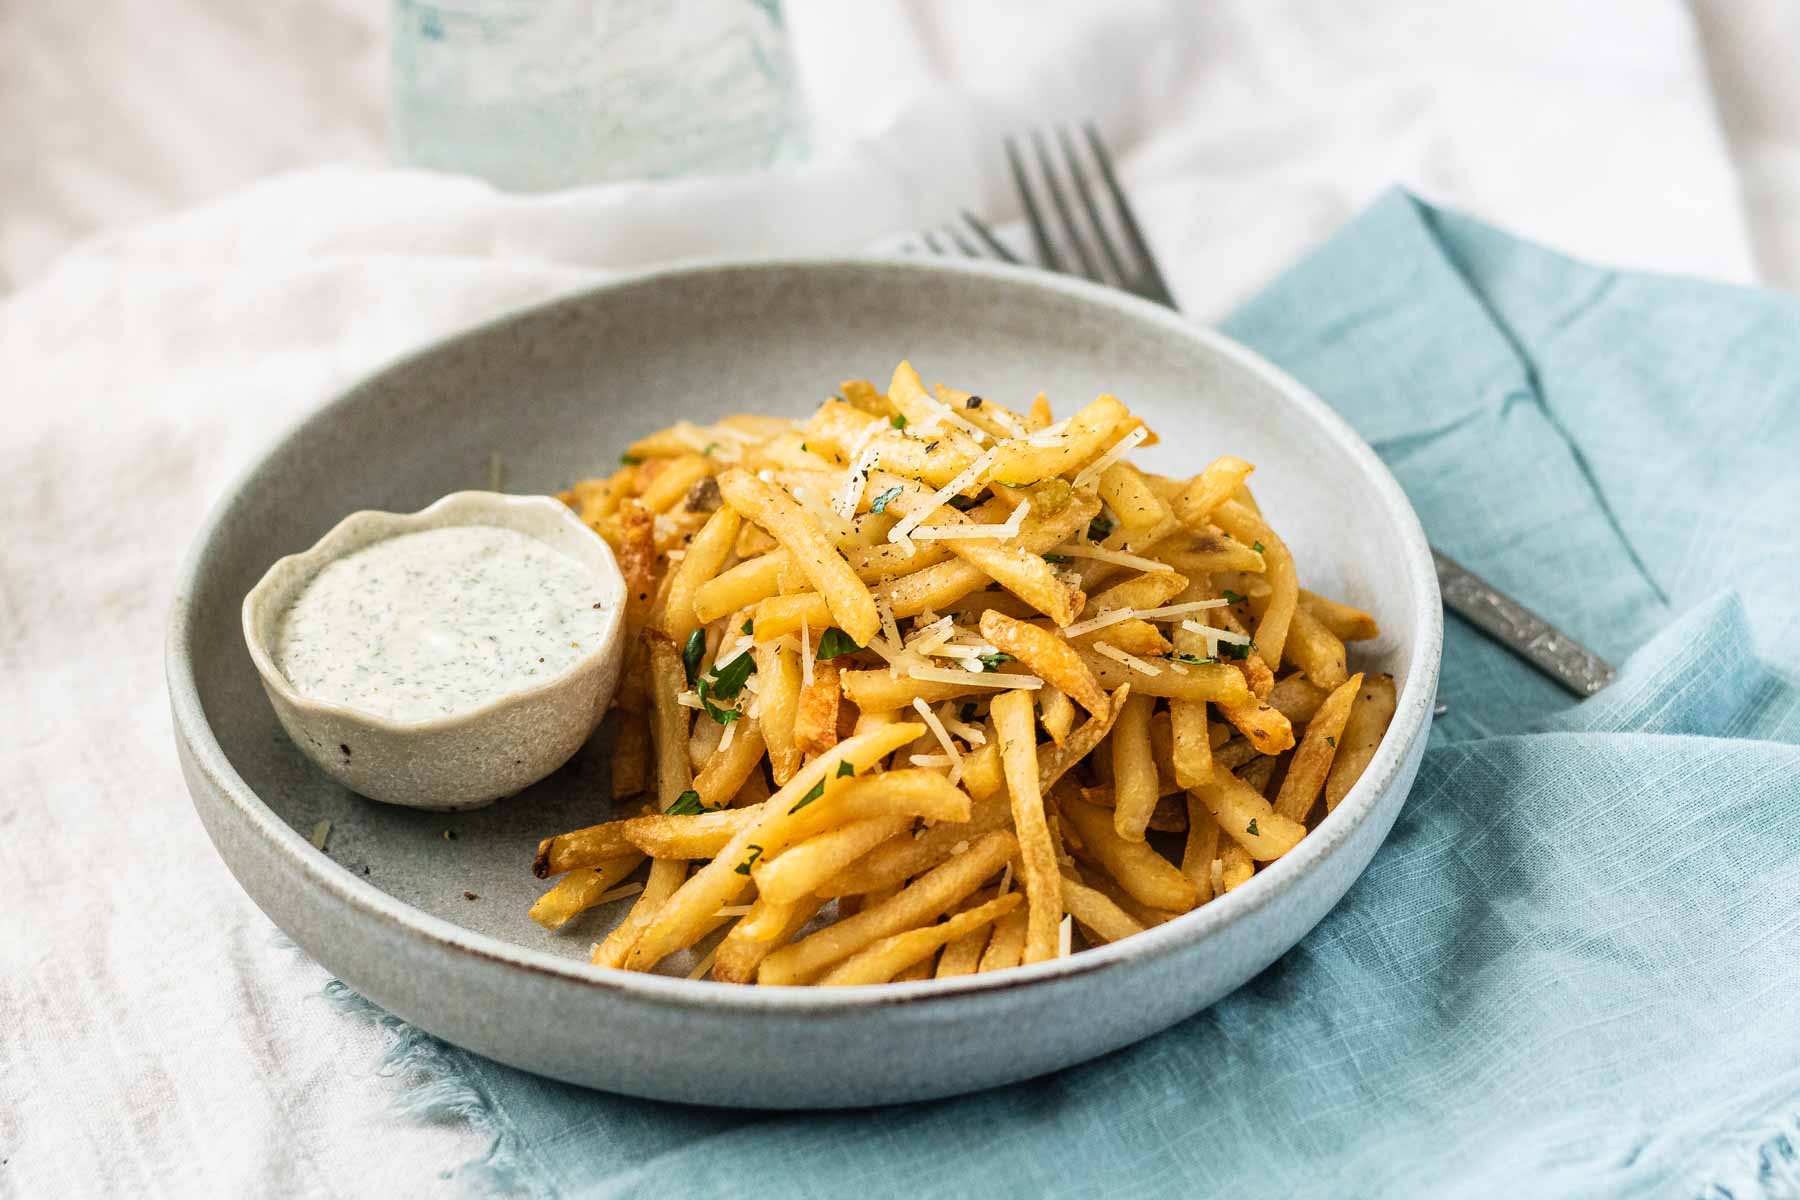 Fries on a plate garnished with parmesan cheese and parsley.